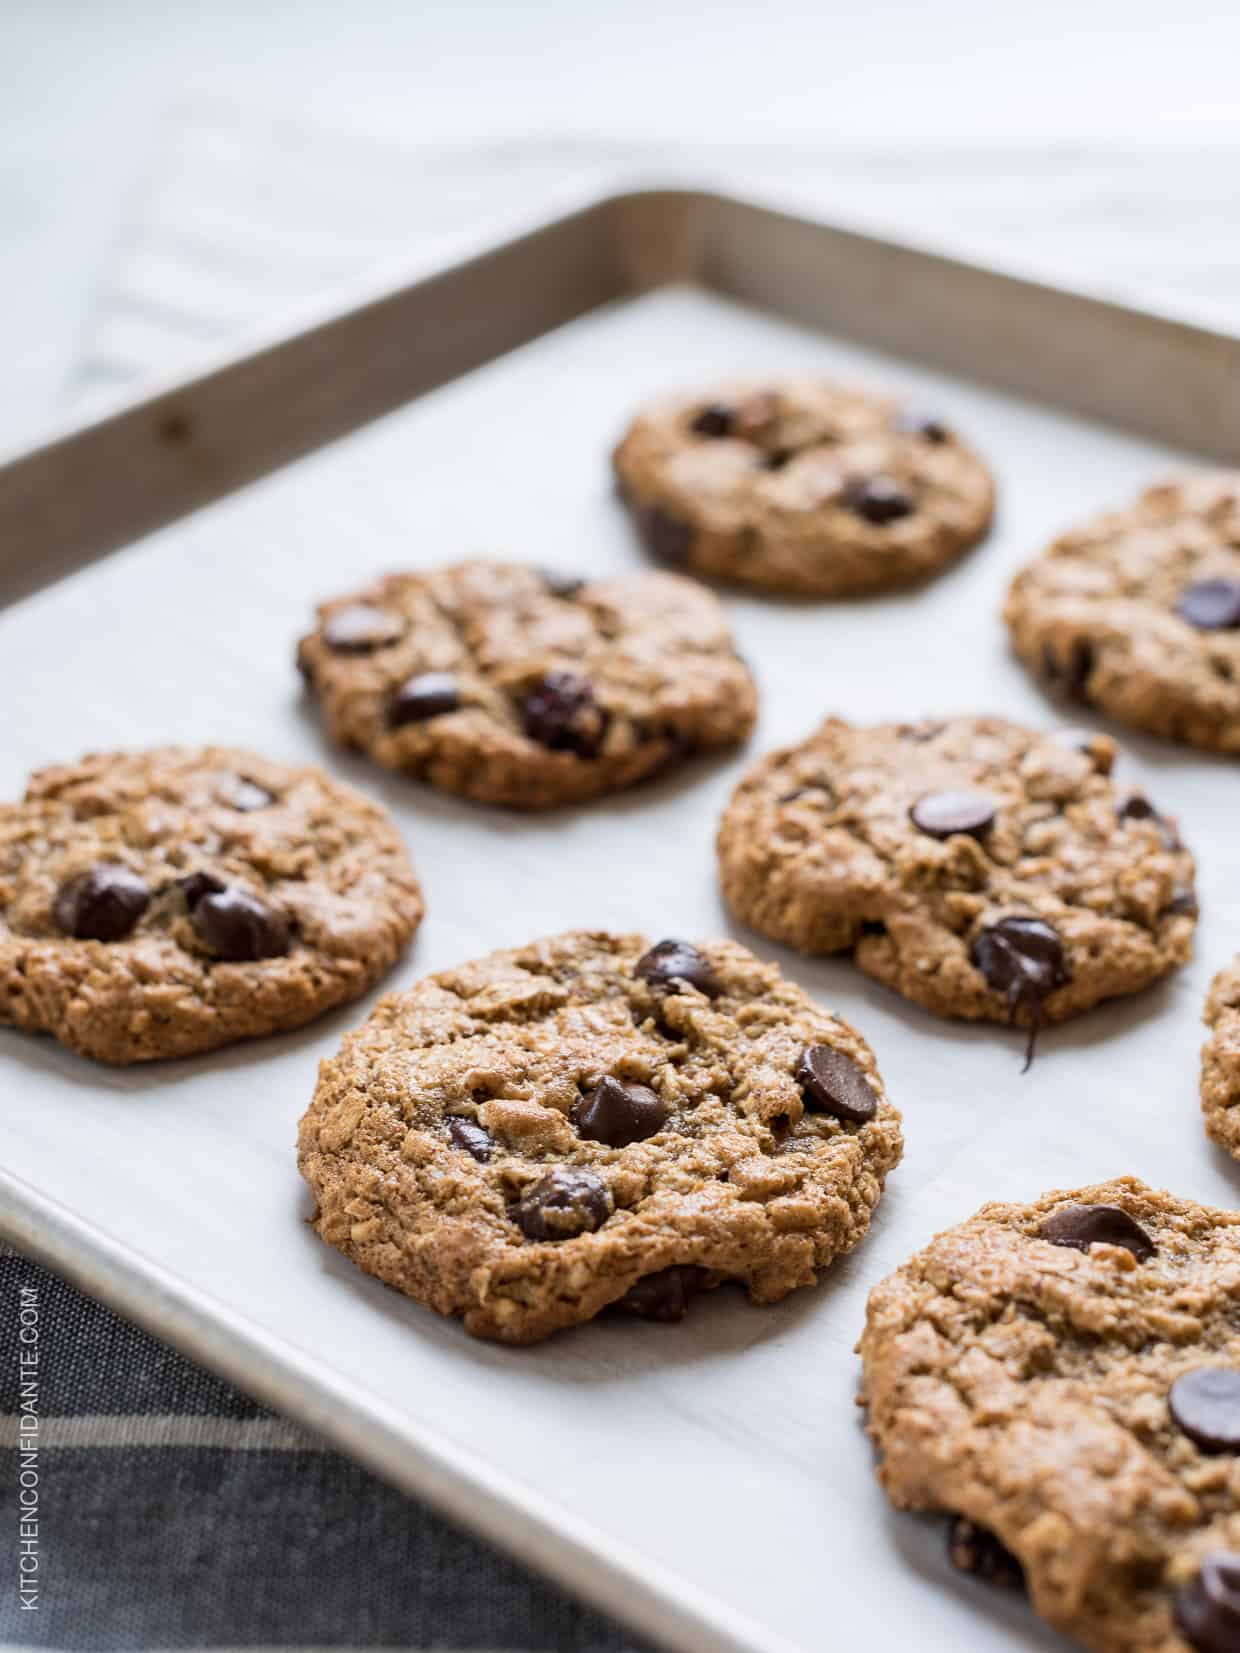 Almond Butter Oatmeal Cookies with chocolate chips on a baking sheet.